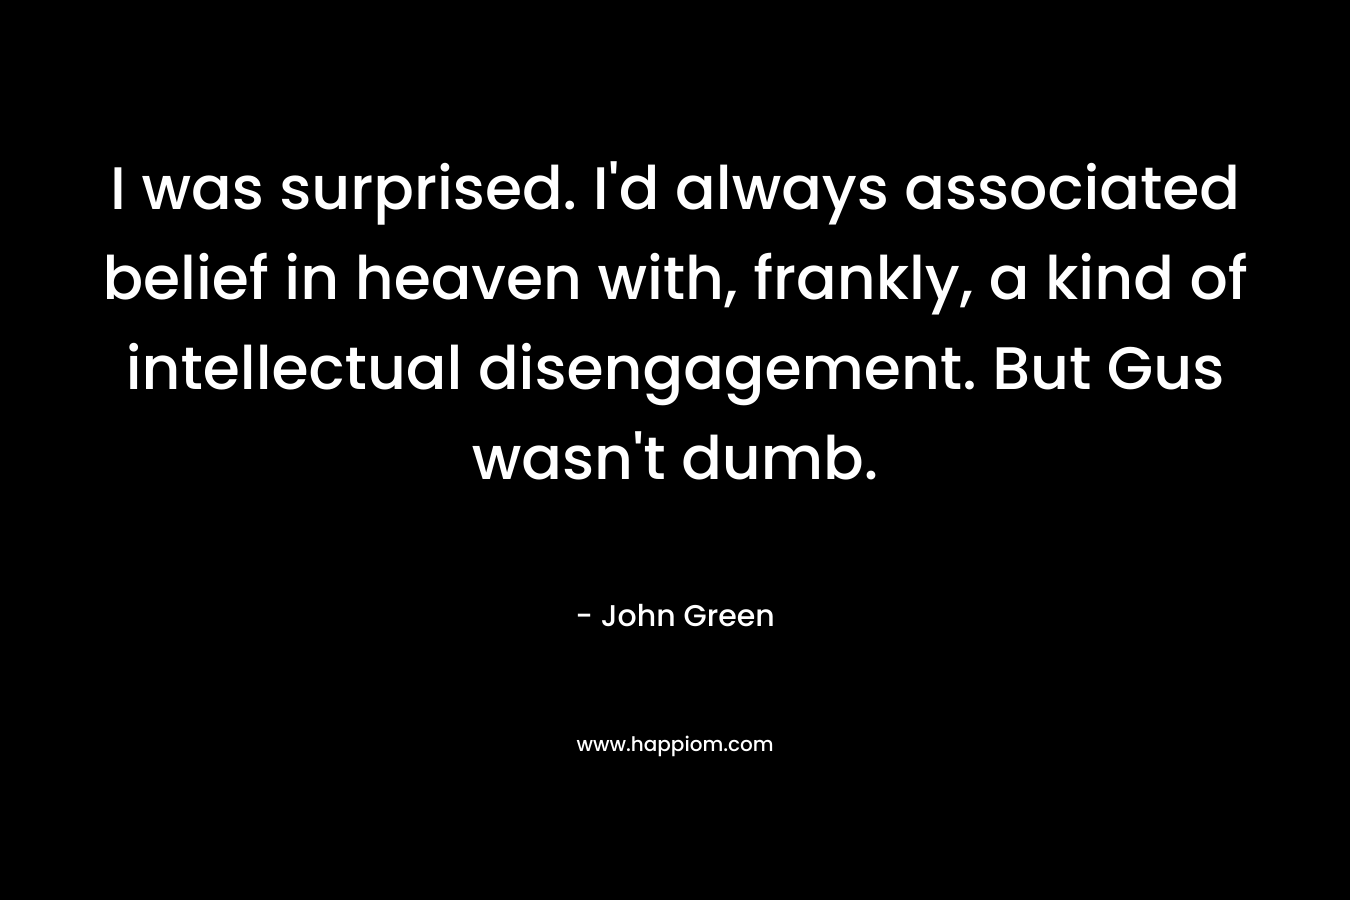 I was surprised. I’d always associated belief in heaven with, frankly, a kind of intellectual disengagement. But Gus wasn’t dumb. – John Green